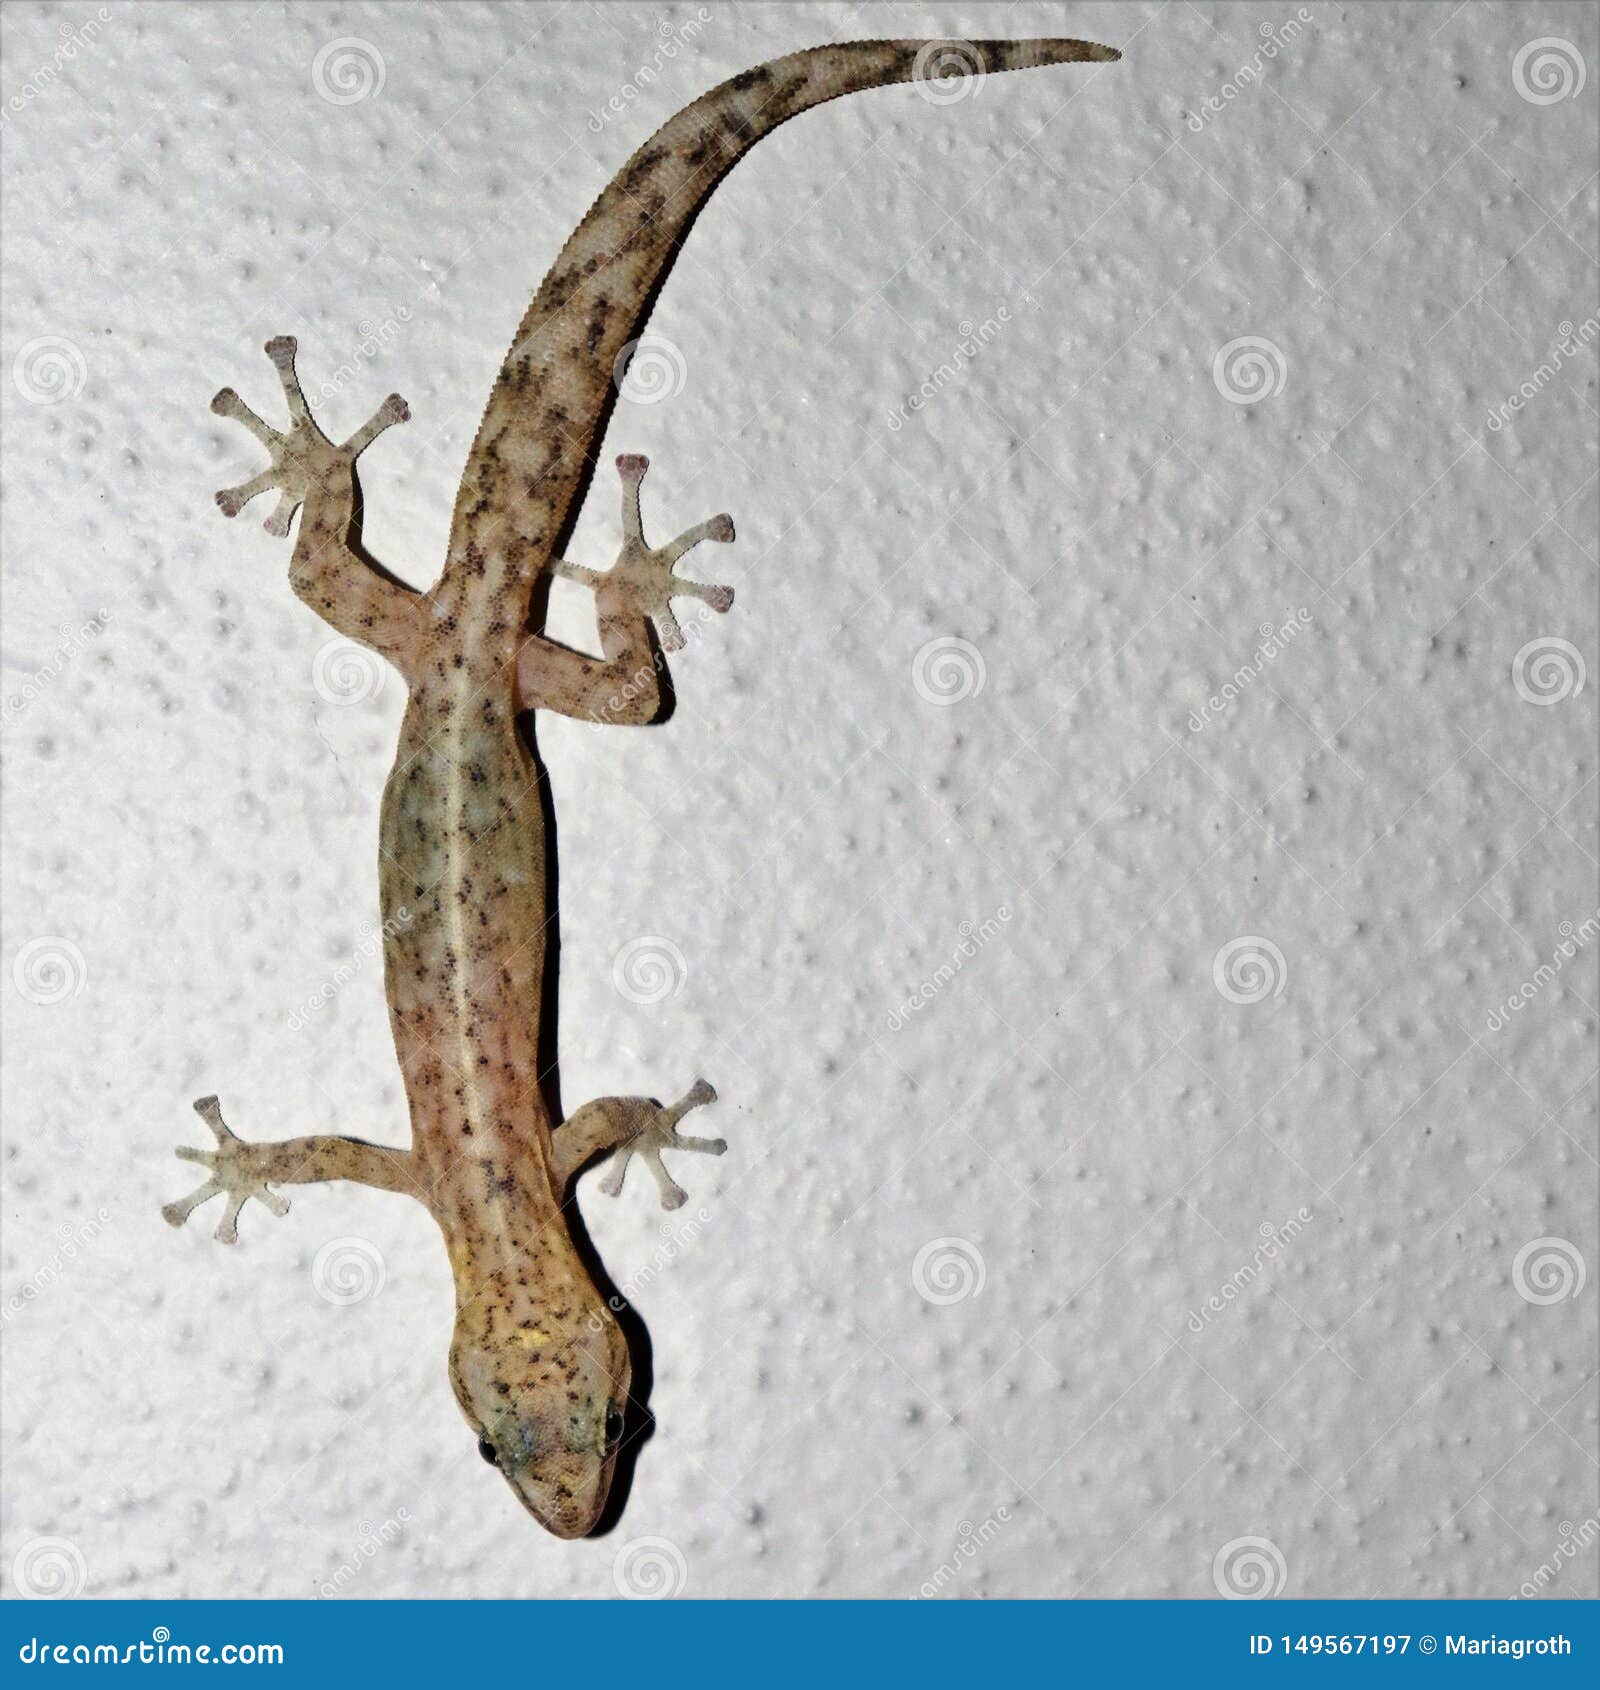 A Small Lizard on a White House Wall Stock Image - Image of flora,  climbing: 149567197